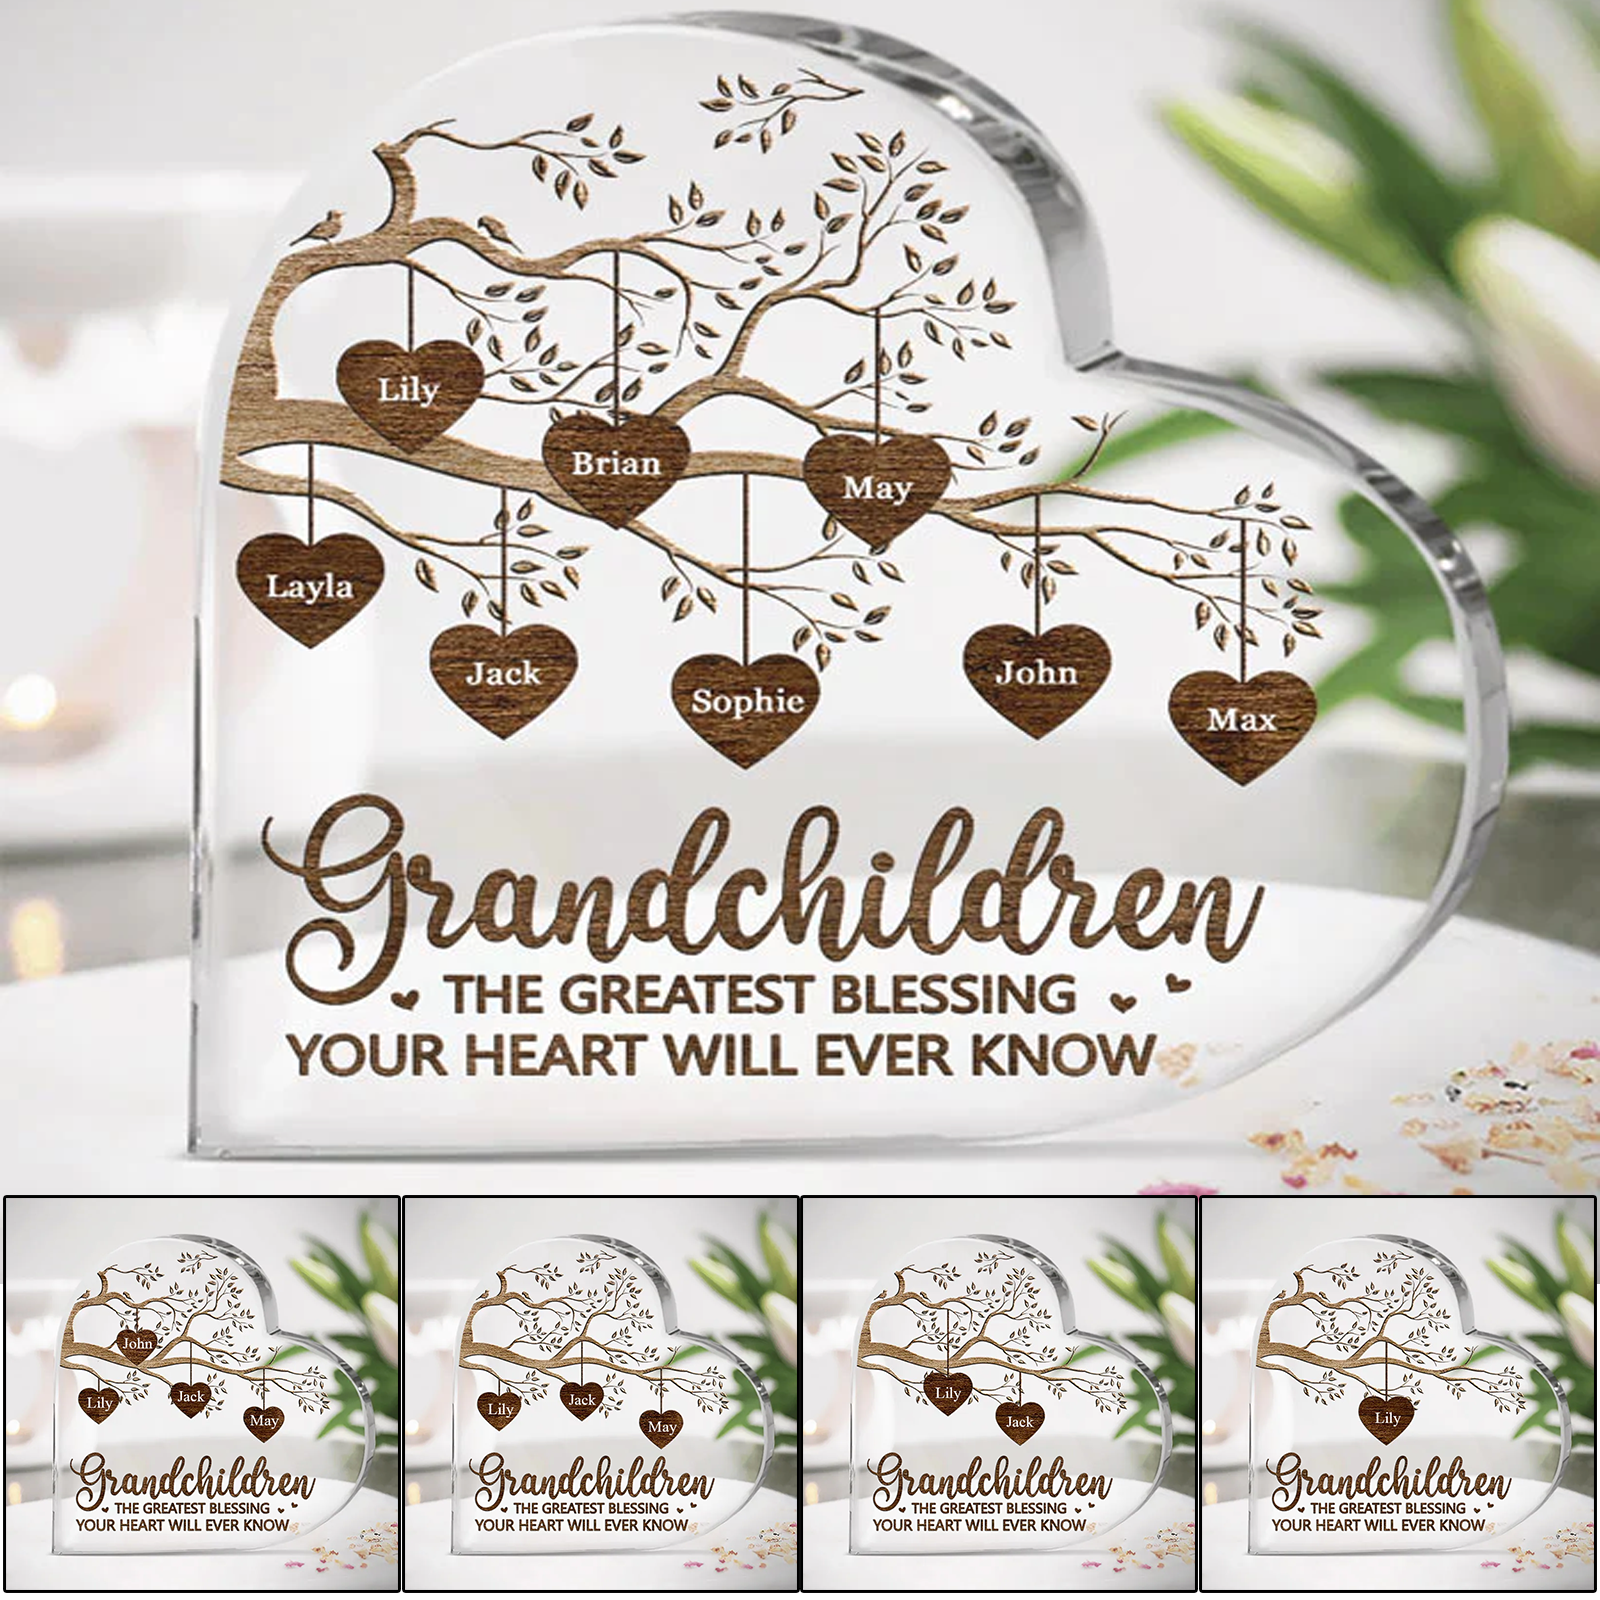 Grandchildren Custom Heart Shaped Acrylic Plaque, Mother's Day, The Greatest Blessing Personalized Custom Heart Shaped Acrylic Plaque, Your Heart Will Ever Know Custom Heart Shaped Acrylic Plaque